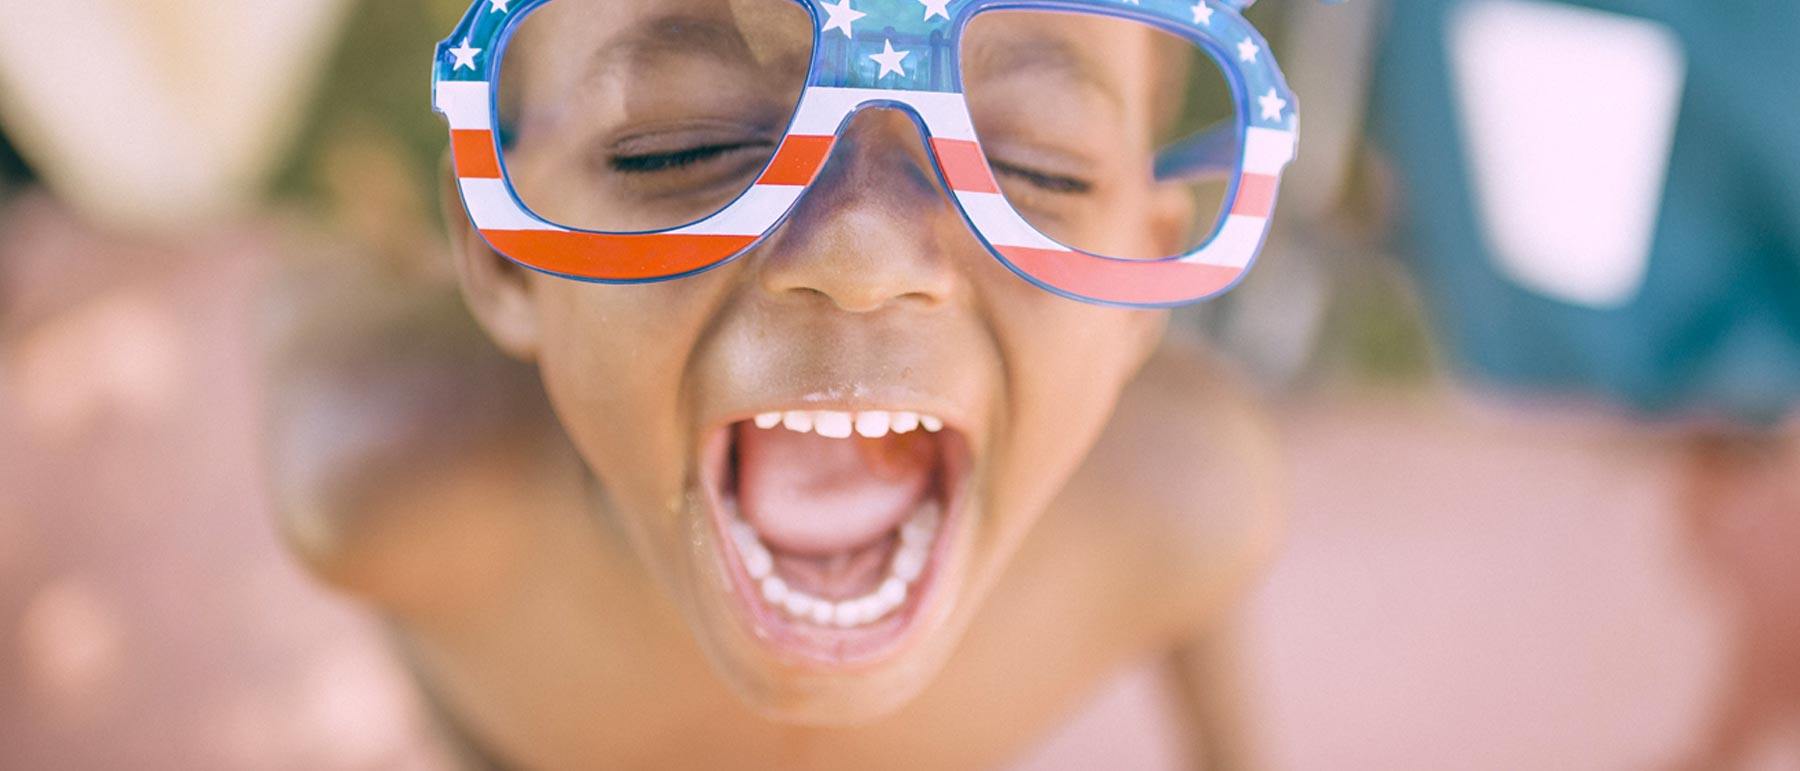 a young boy with patriotic sunglasses is yelling outside on a bright day